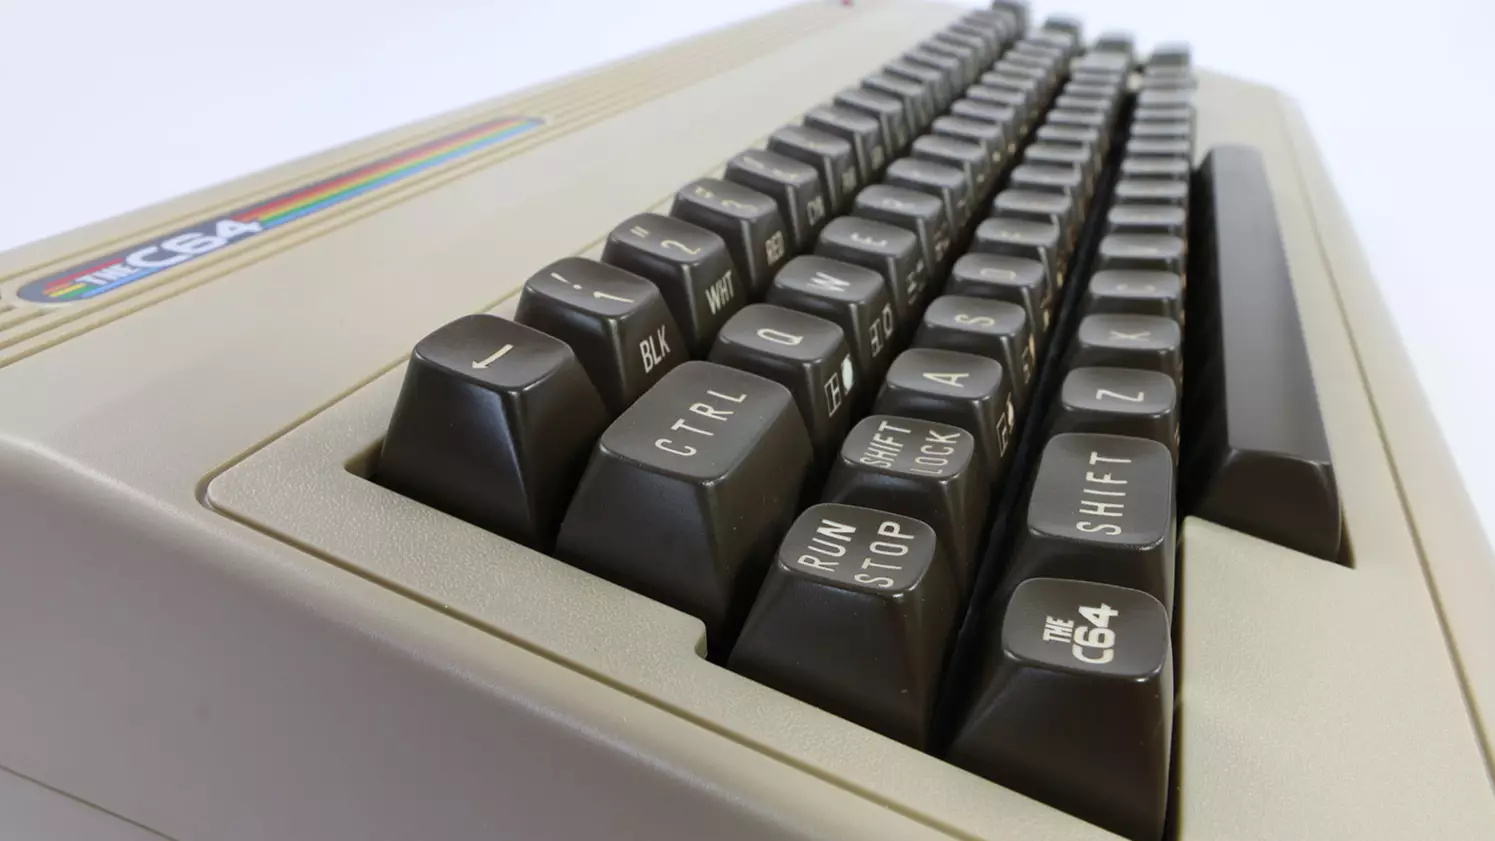 The C64 Is Two Commodores In One, But Limited Of Old-School Appeal